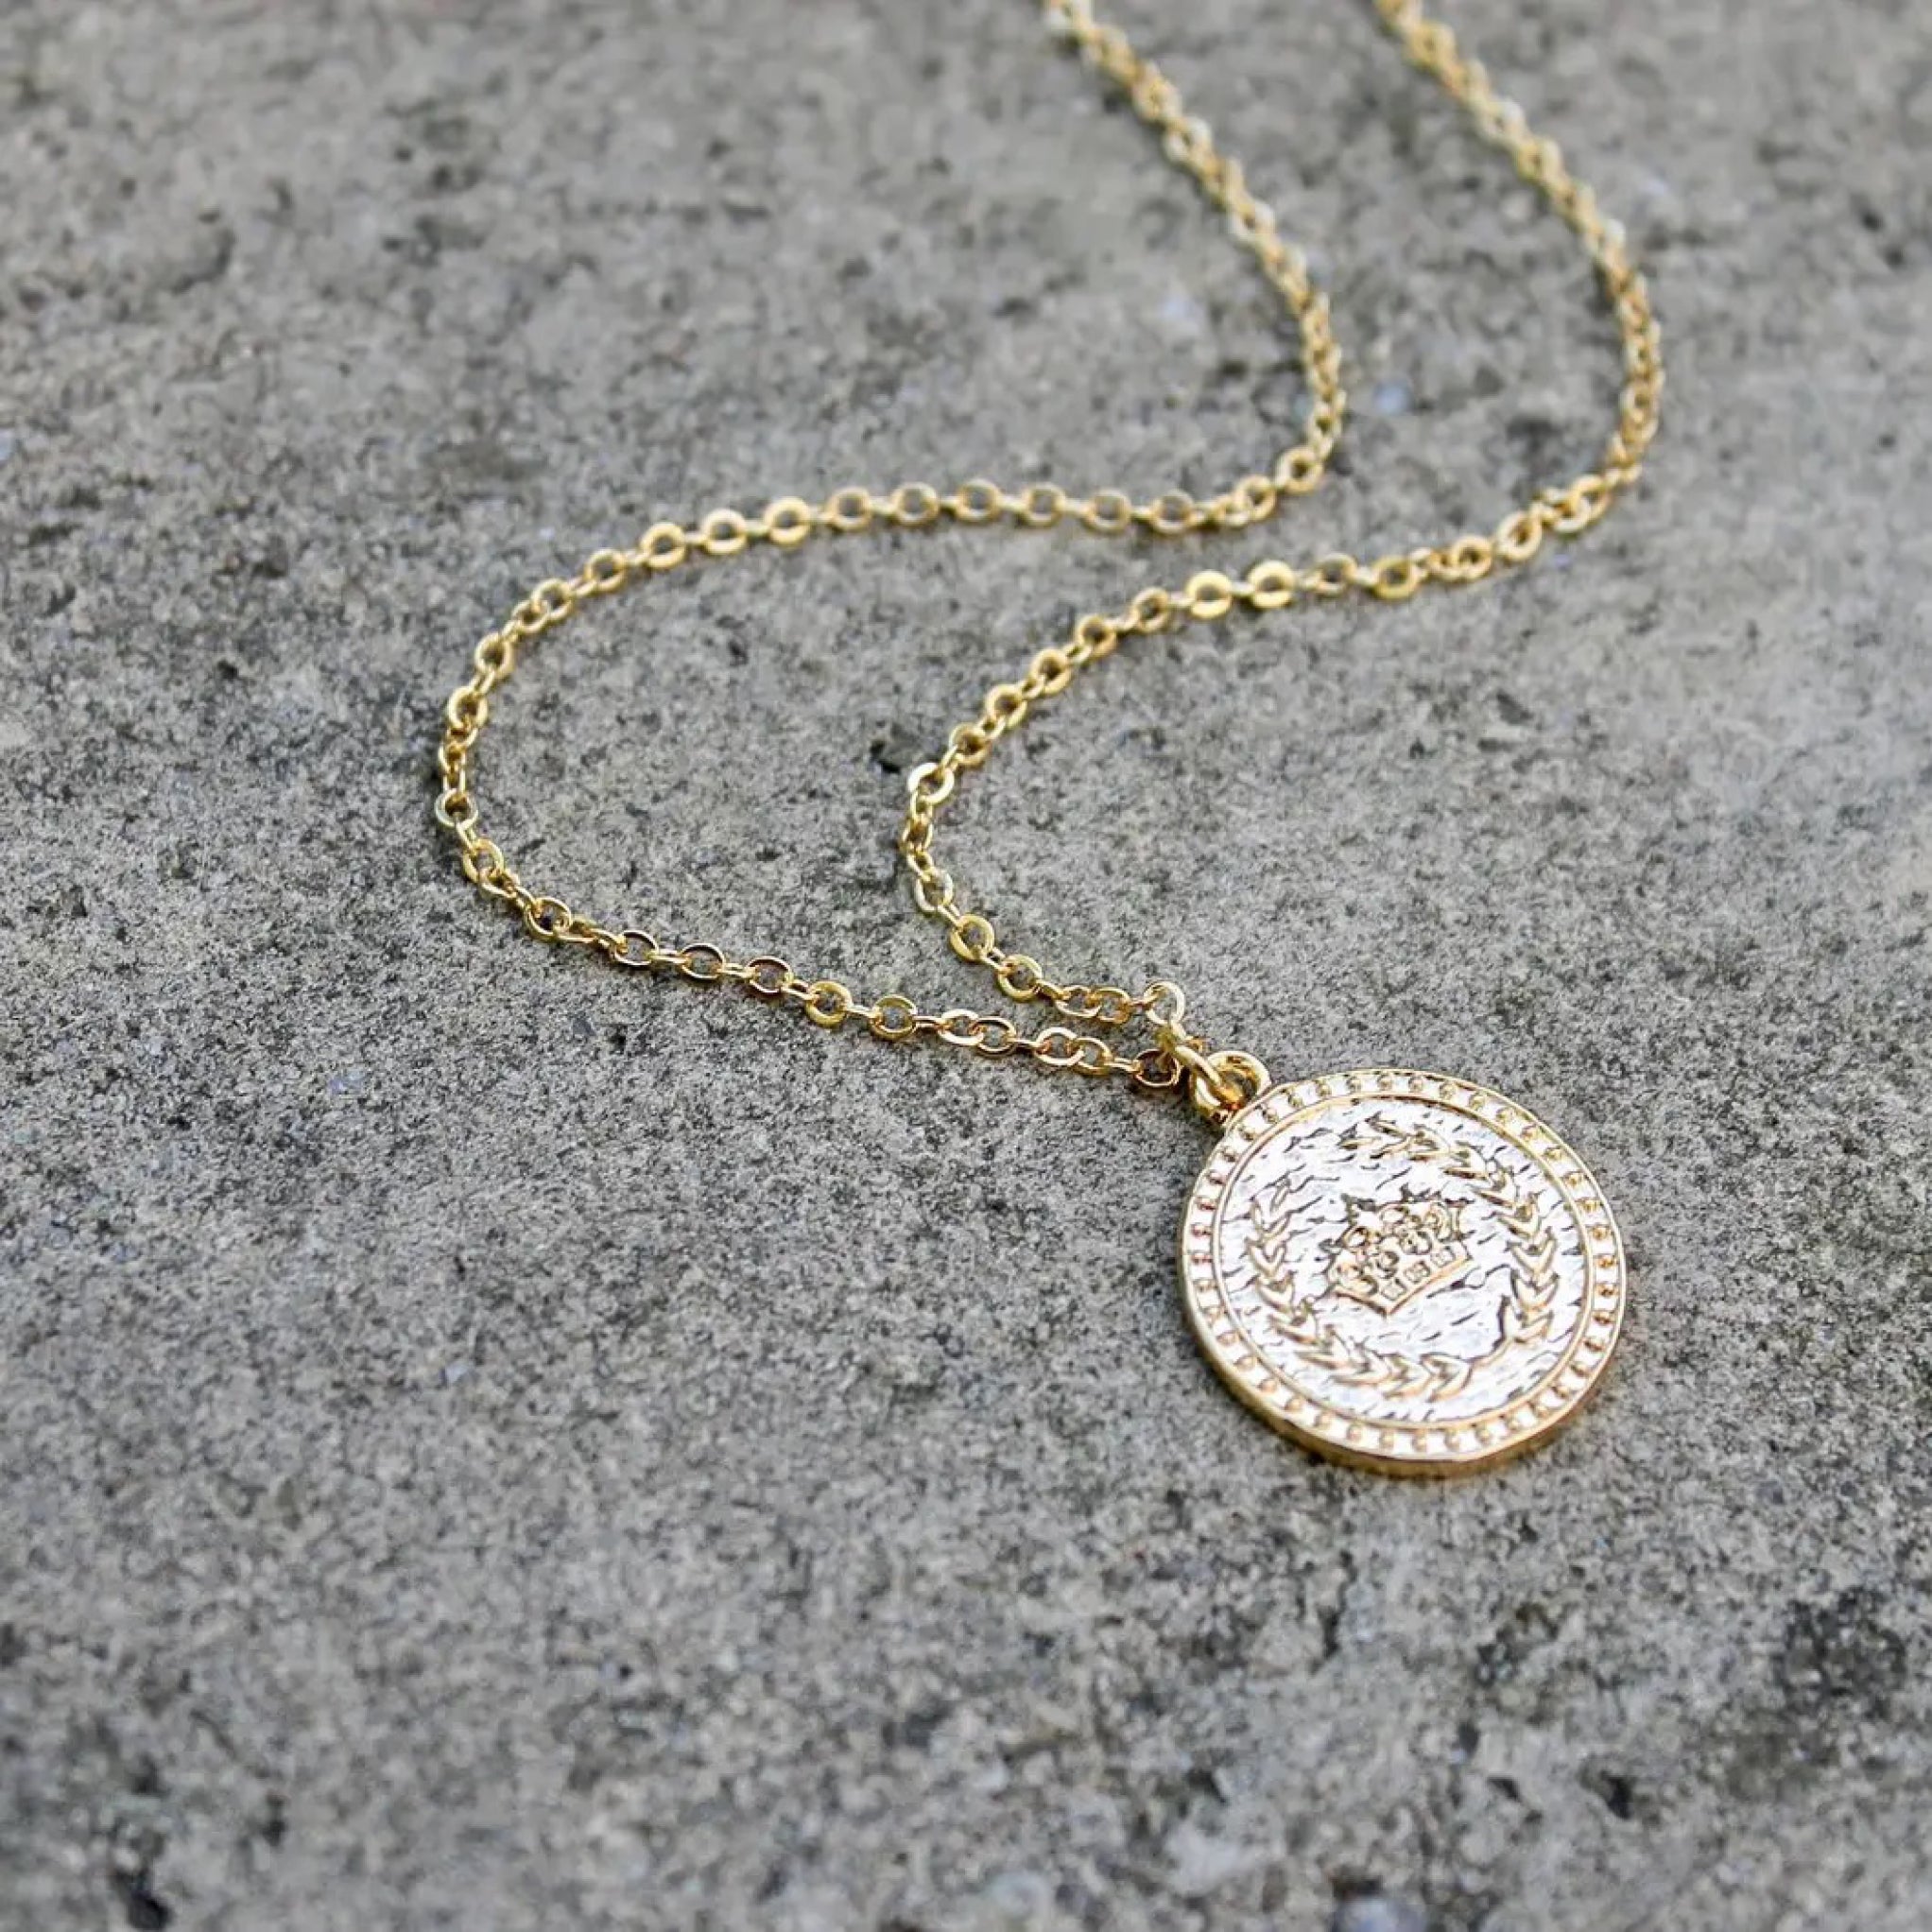 Buy Diamond Circle Frame for Gold Coin Medallion Necklace